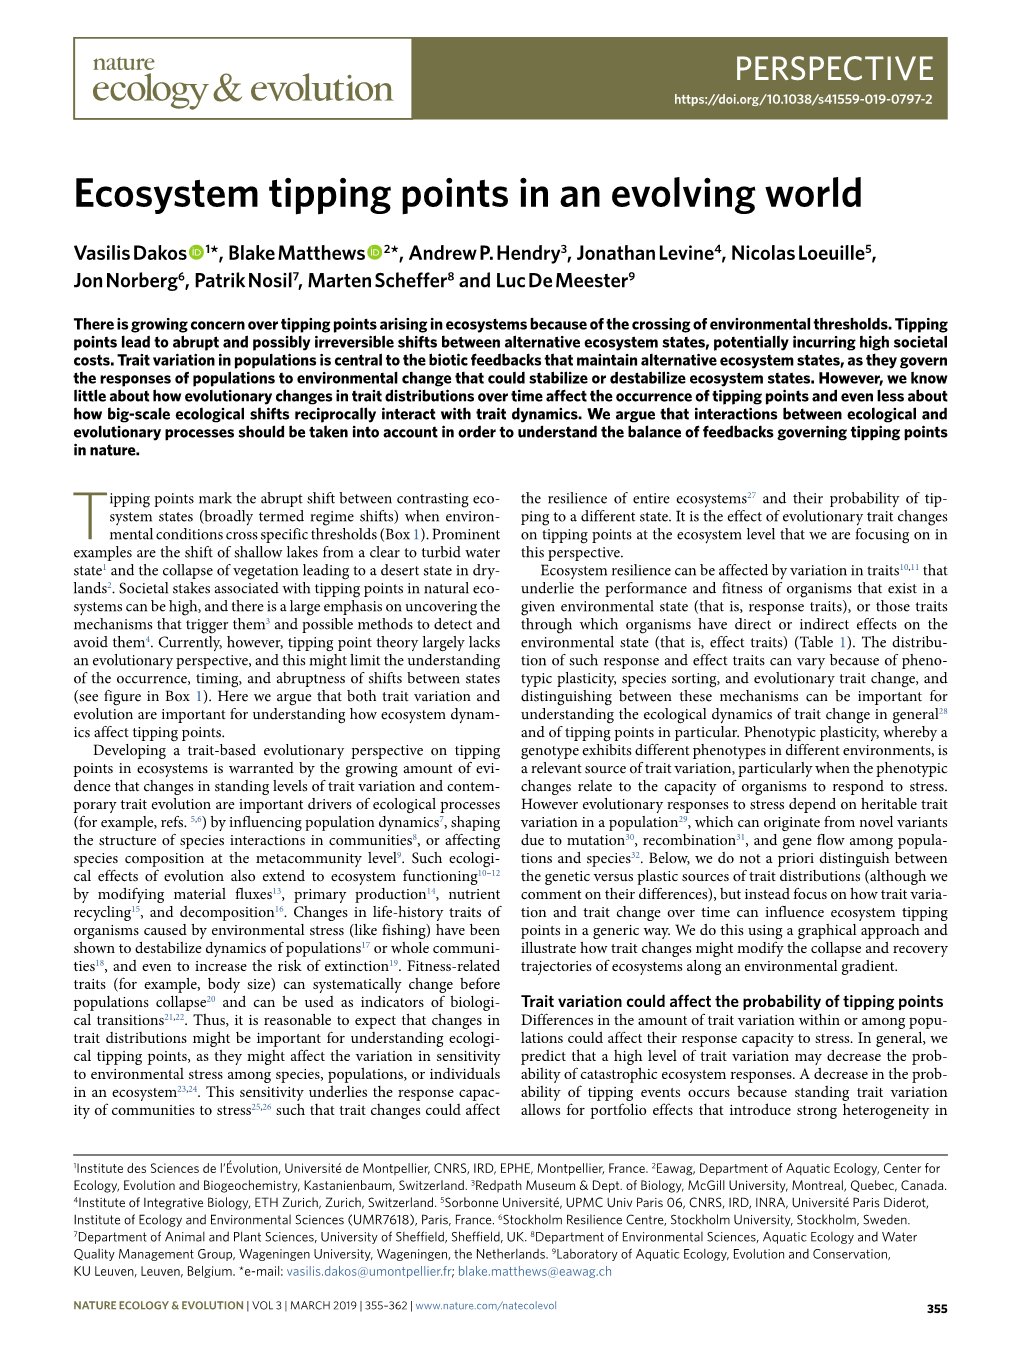 Ecosystem Tipping Points in an Evolving World